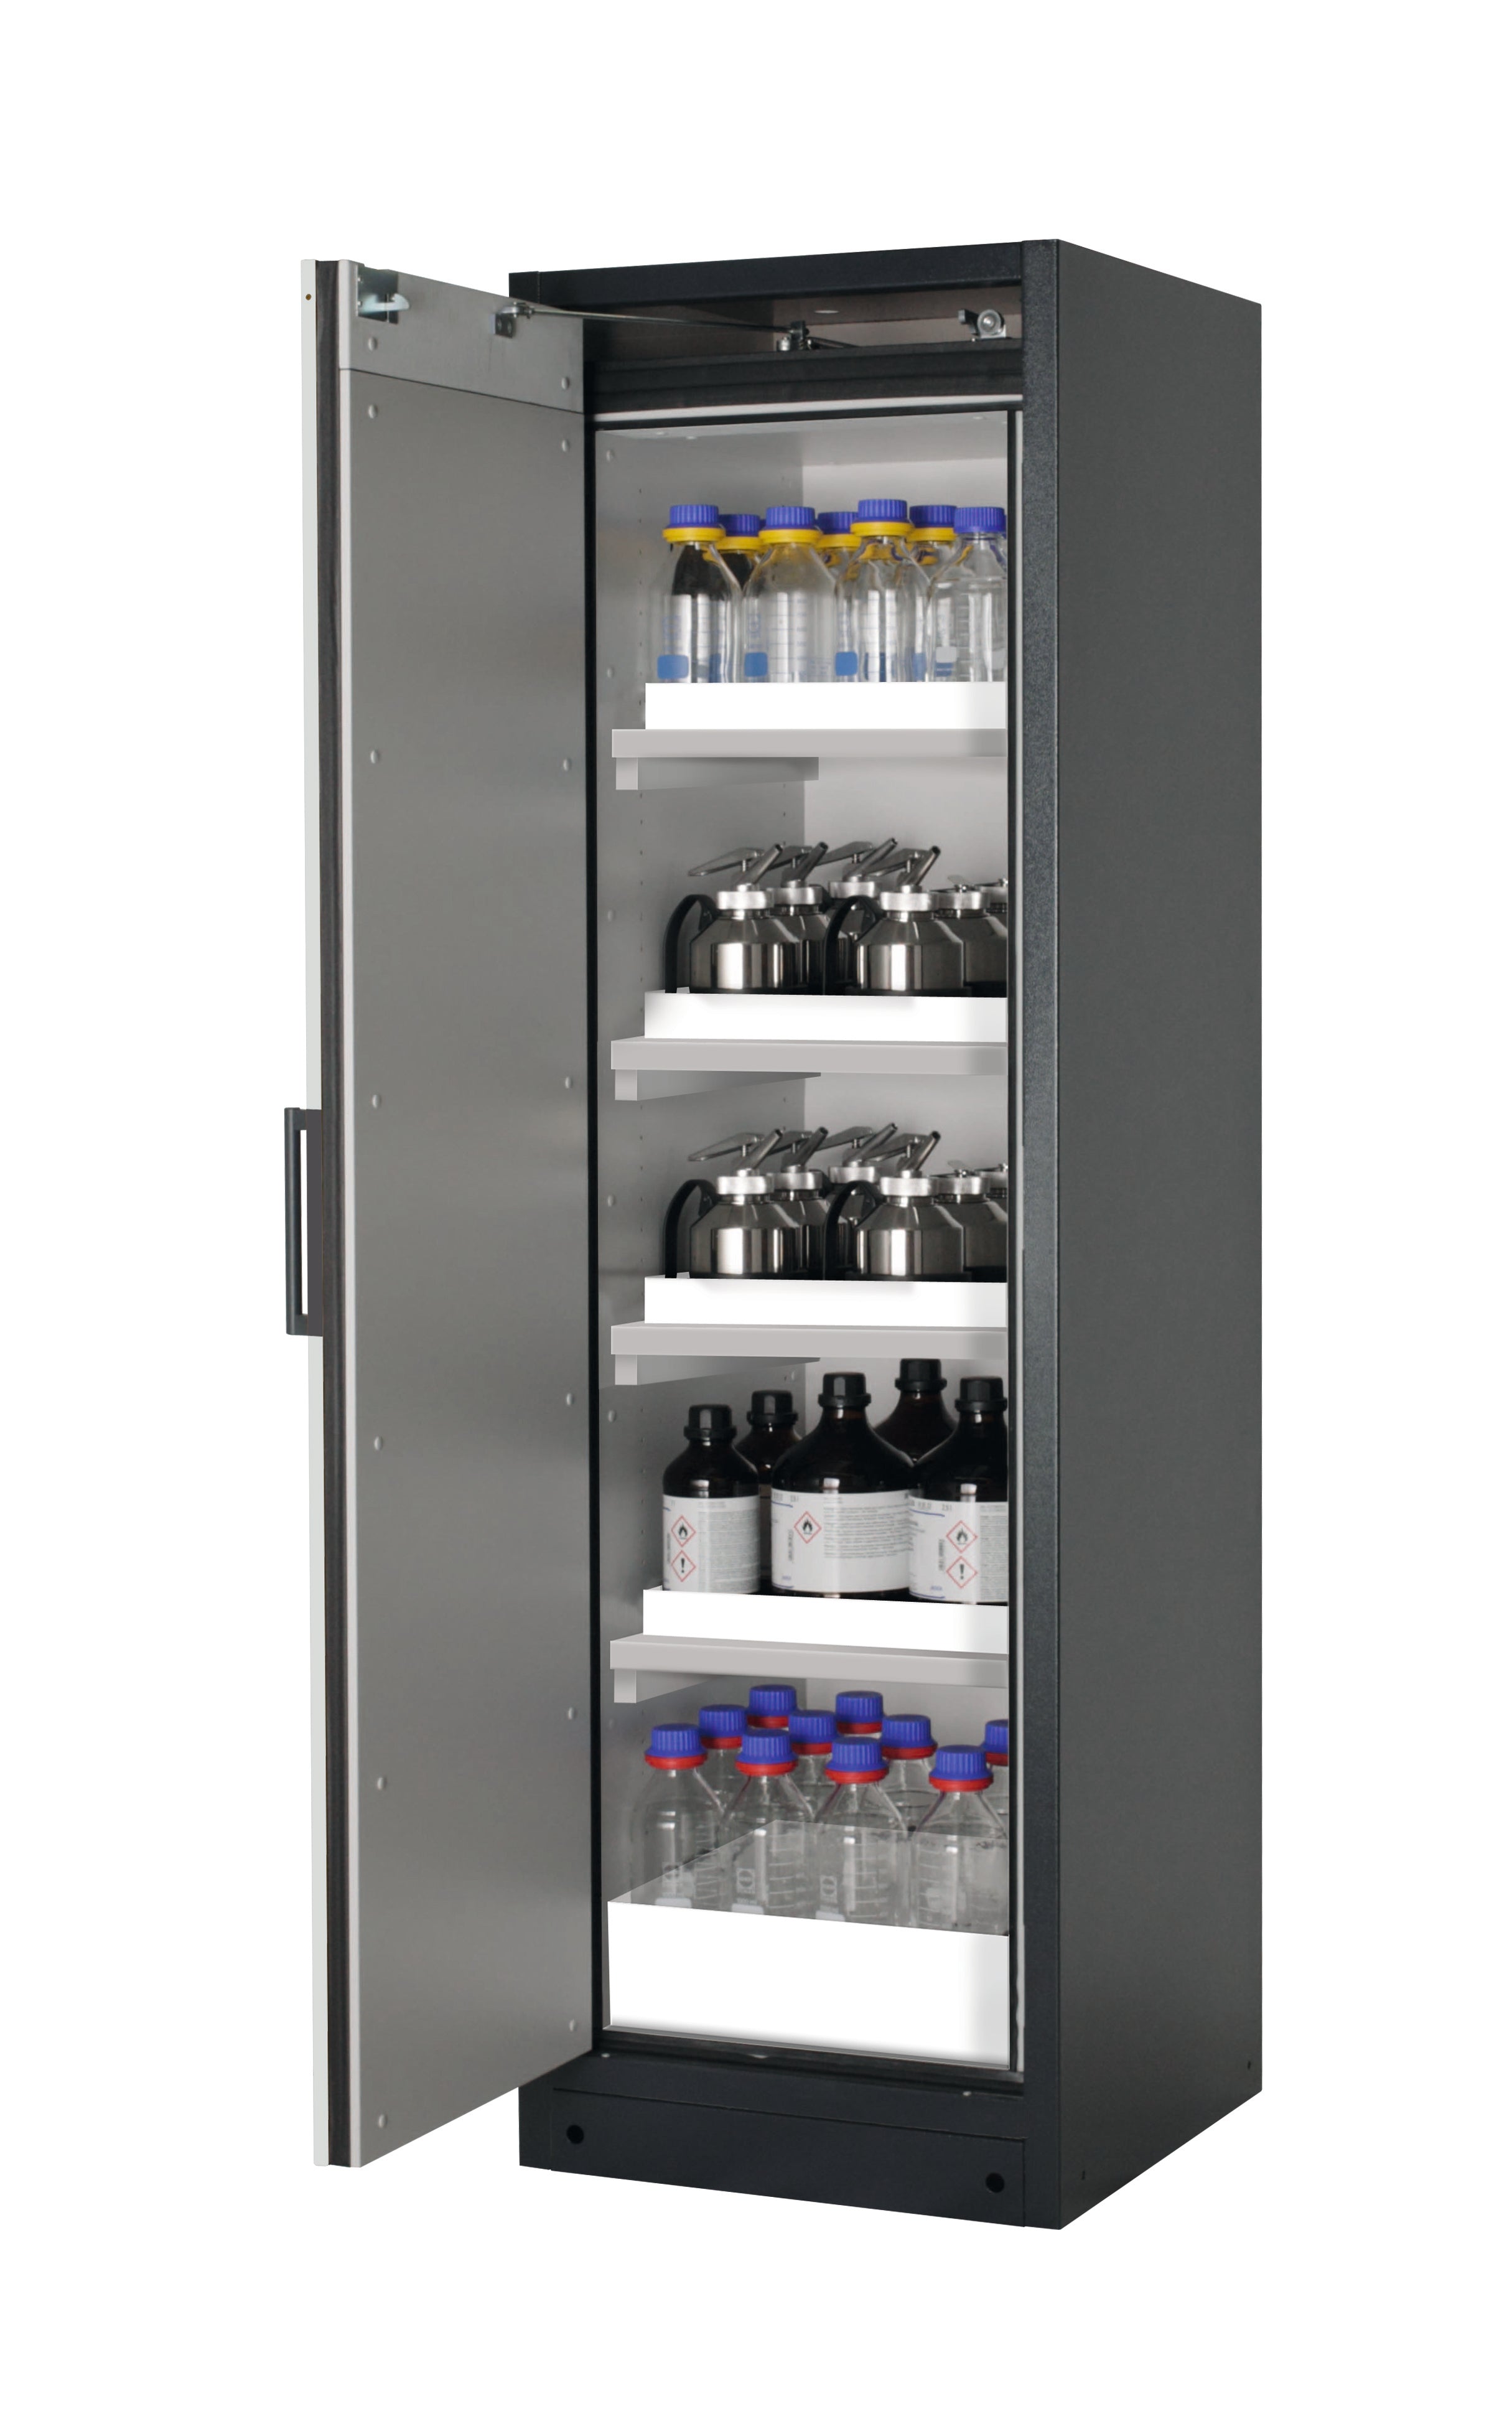 Type 90 safety storage cabinet Q-CLASSIC-90 model Q90.195.060 in light grey RAL 7035 with 4x tray shelf (standard) (polypropylene),